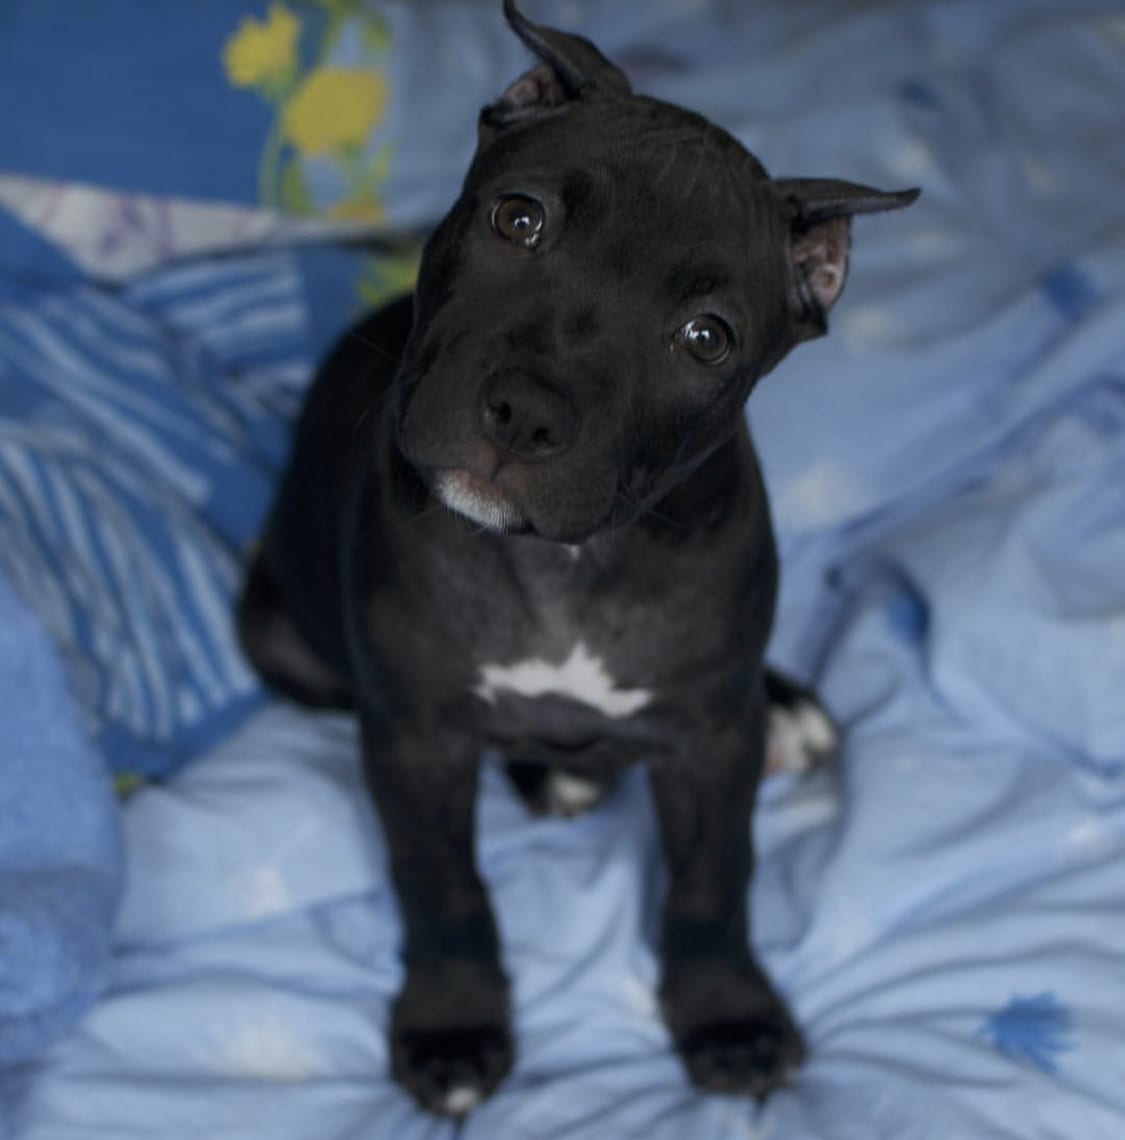 A black Pit Bull sitting on the bed while tilting its head